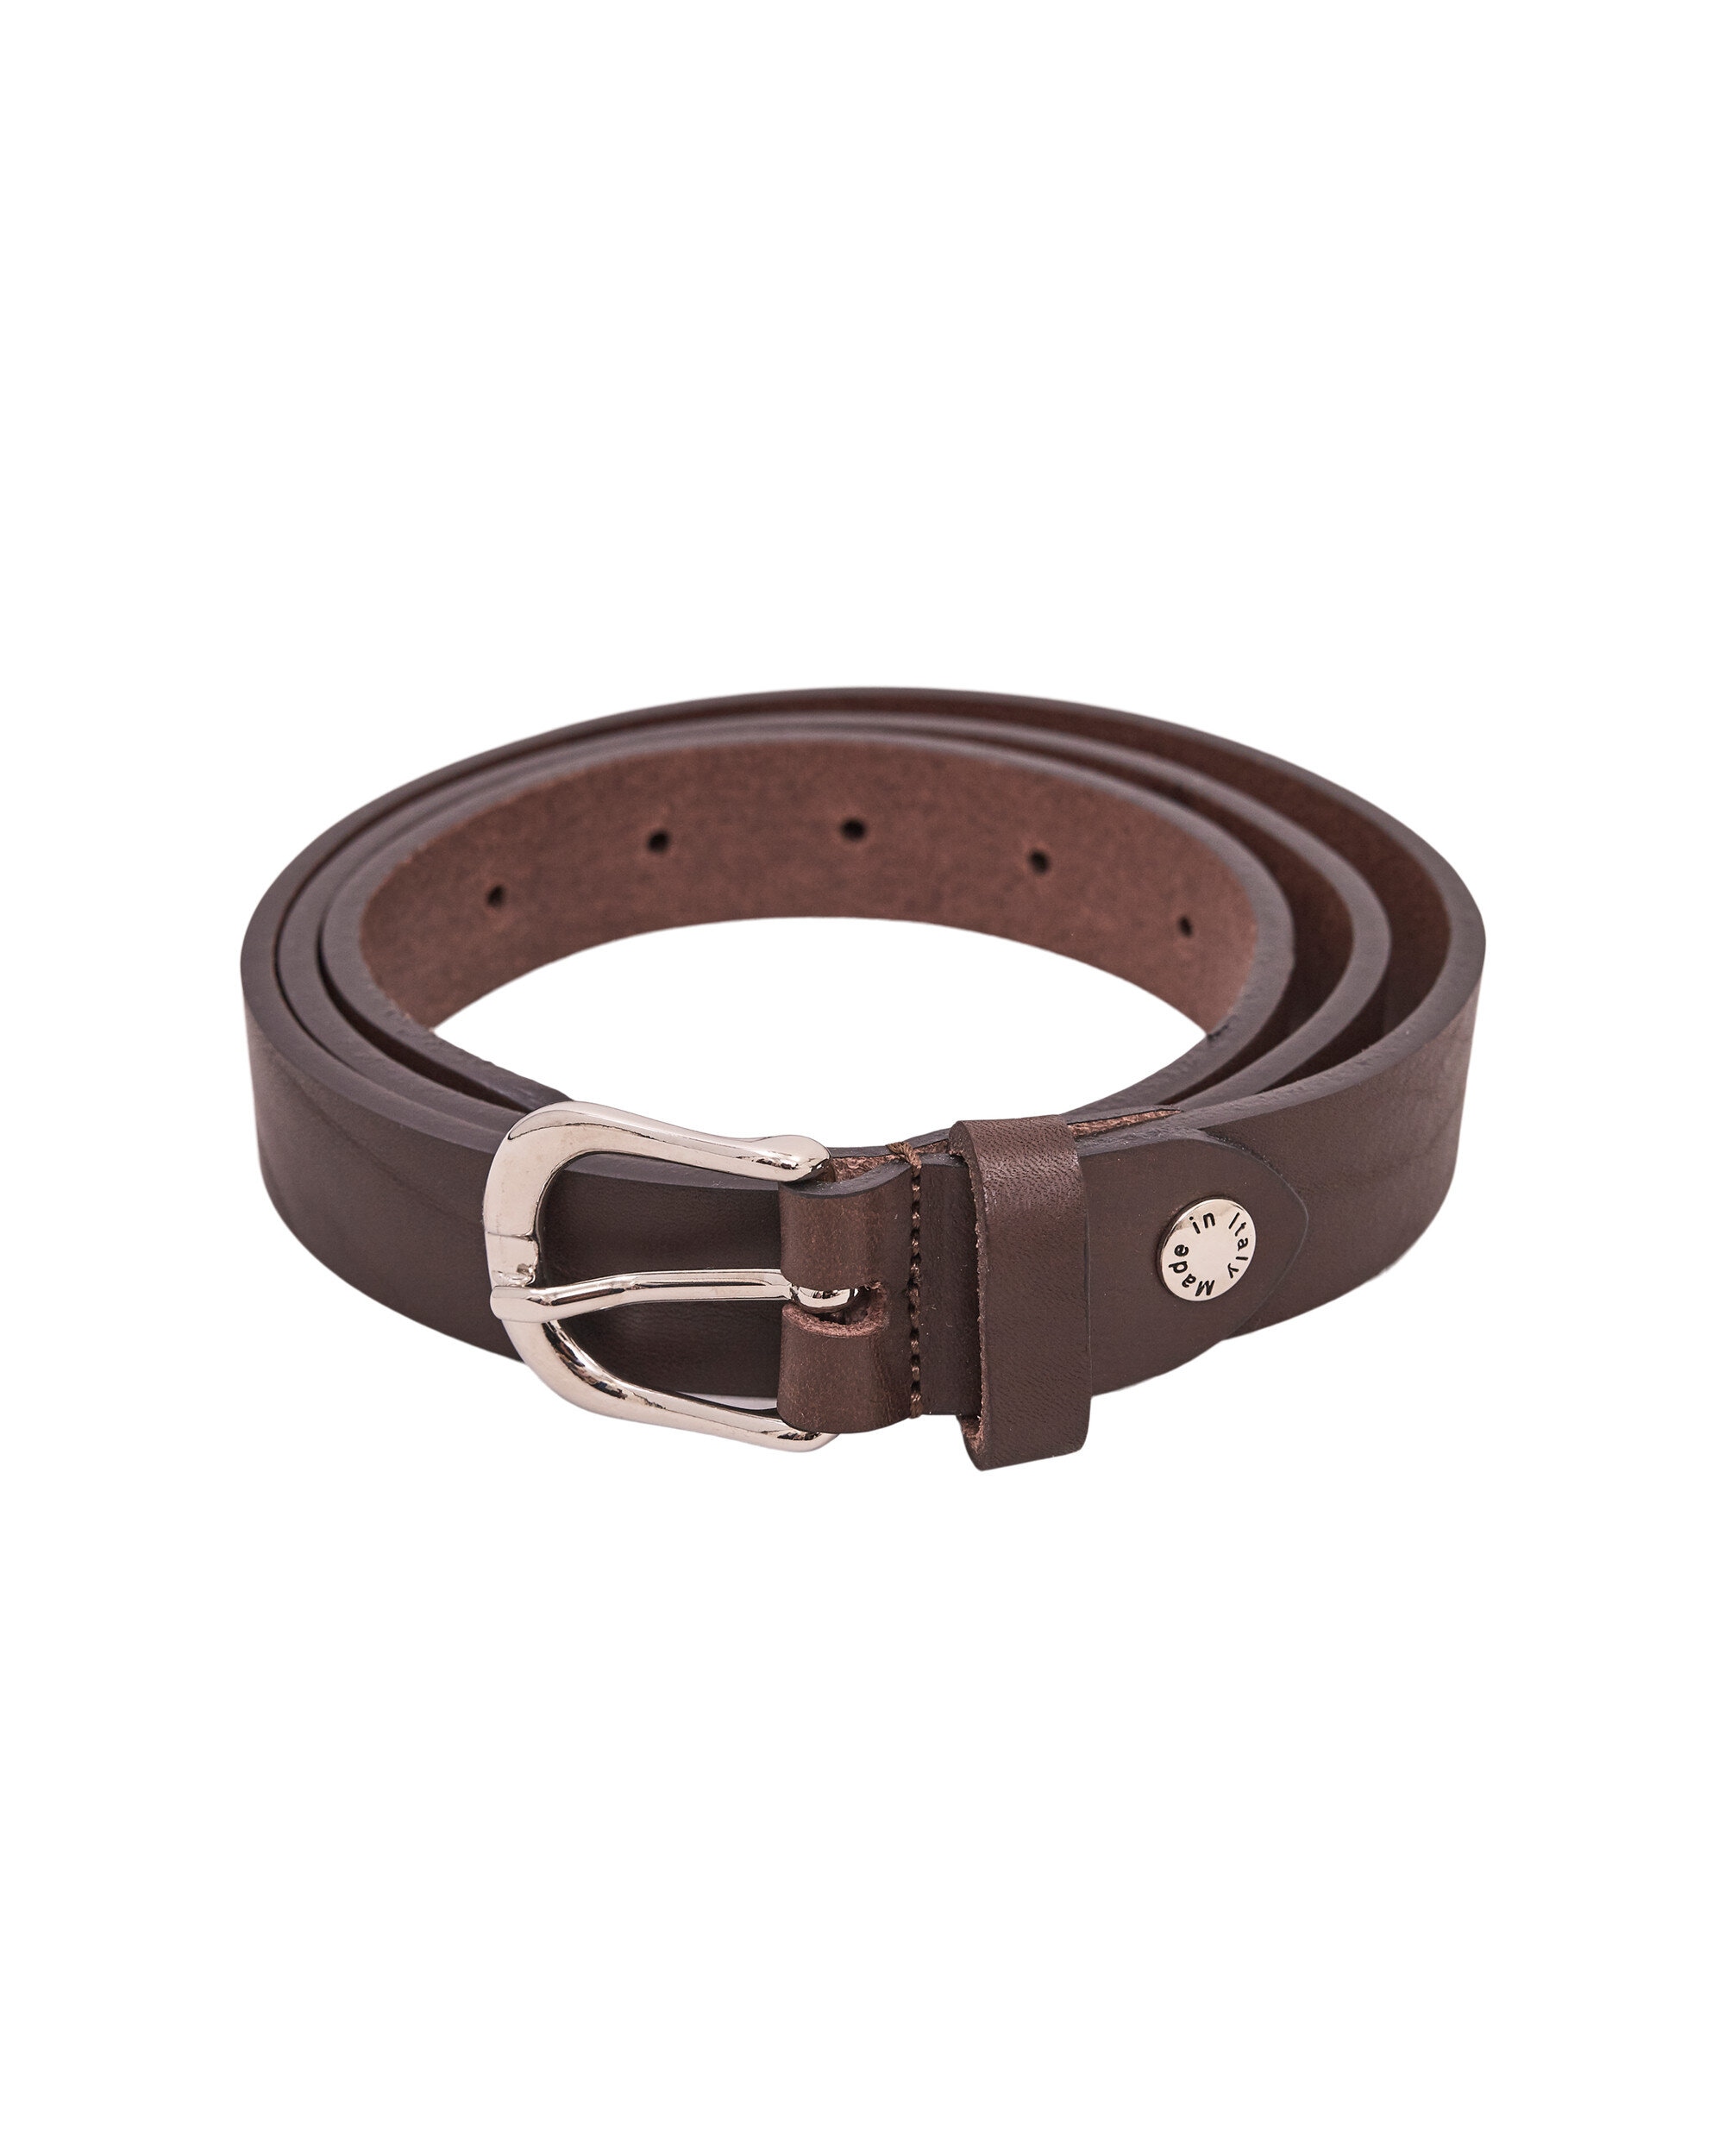 Clean Leather Belt